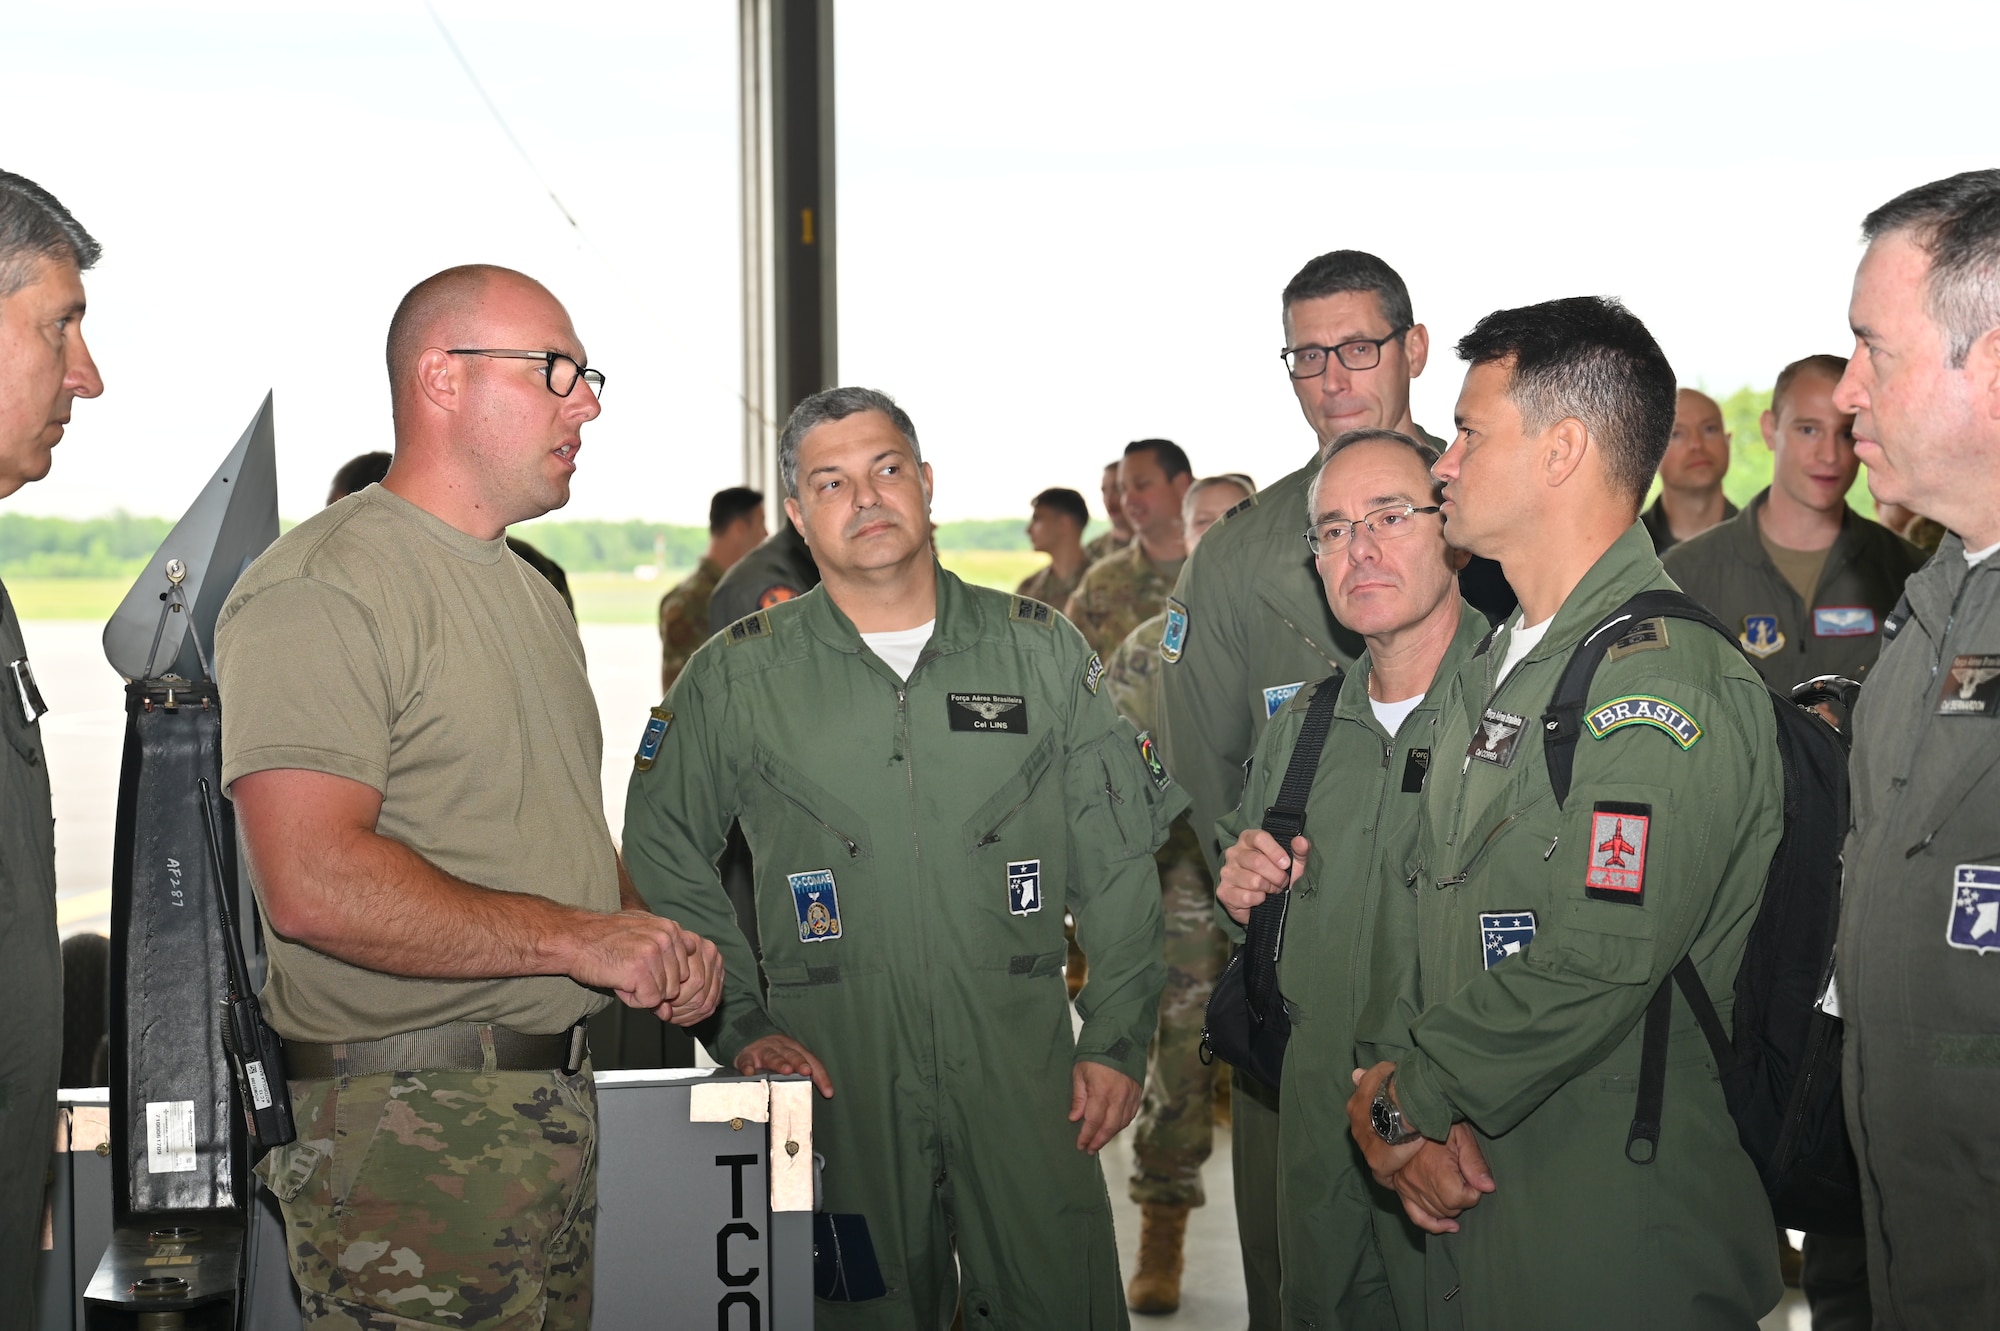 HANCOCK FIELD AIR NATIONAL GUARD BASE, SYRACUSE, NY. --  Master Sgt. Eric Wintersteen, a crew chief with the 174th Maintenance Group, is explaining how he is performing an airframe and engine inspection on the MQ-9 reaper to members from the Brazilian military on June 6, 2022 at Hancock Field Air National Guard base. The Brazilian military’s purpose for the visit is to strengthen the partnership between the New York Air National Guard and the Brazilian Air Force Aerospace Operations Command. (U.S. Air National Guard photo by Master Sgt. Barbara Olney)